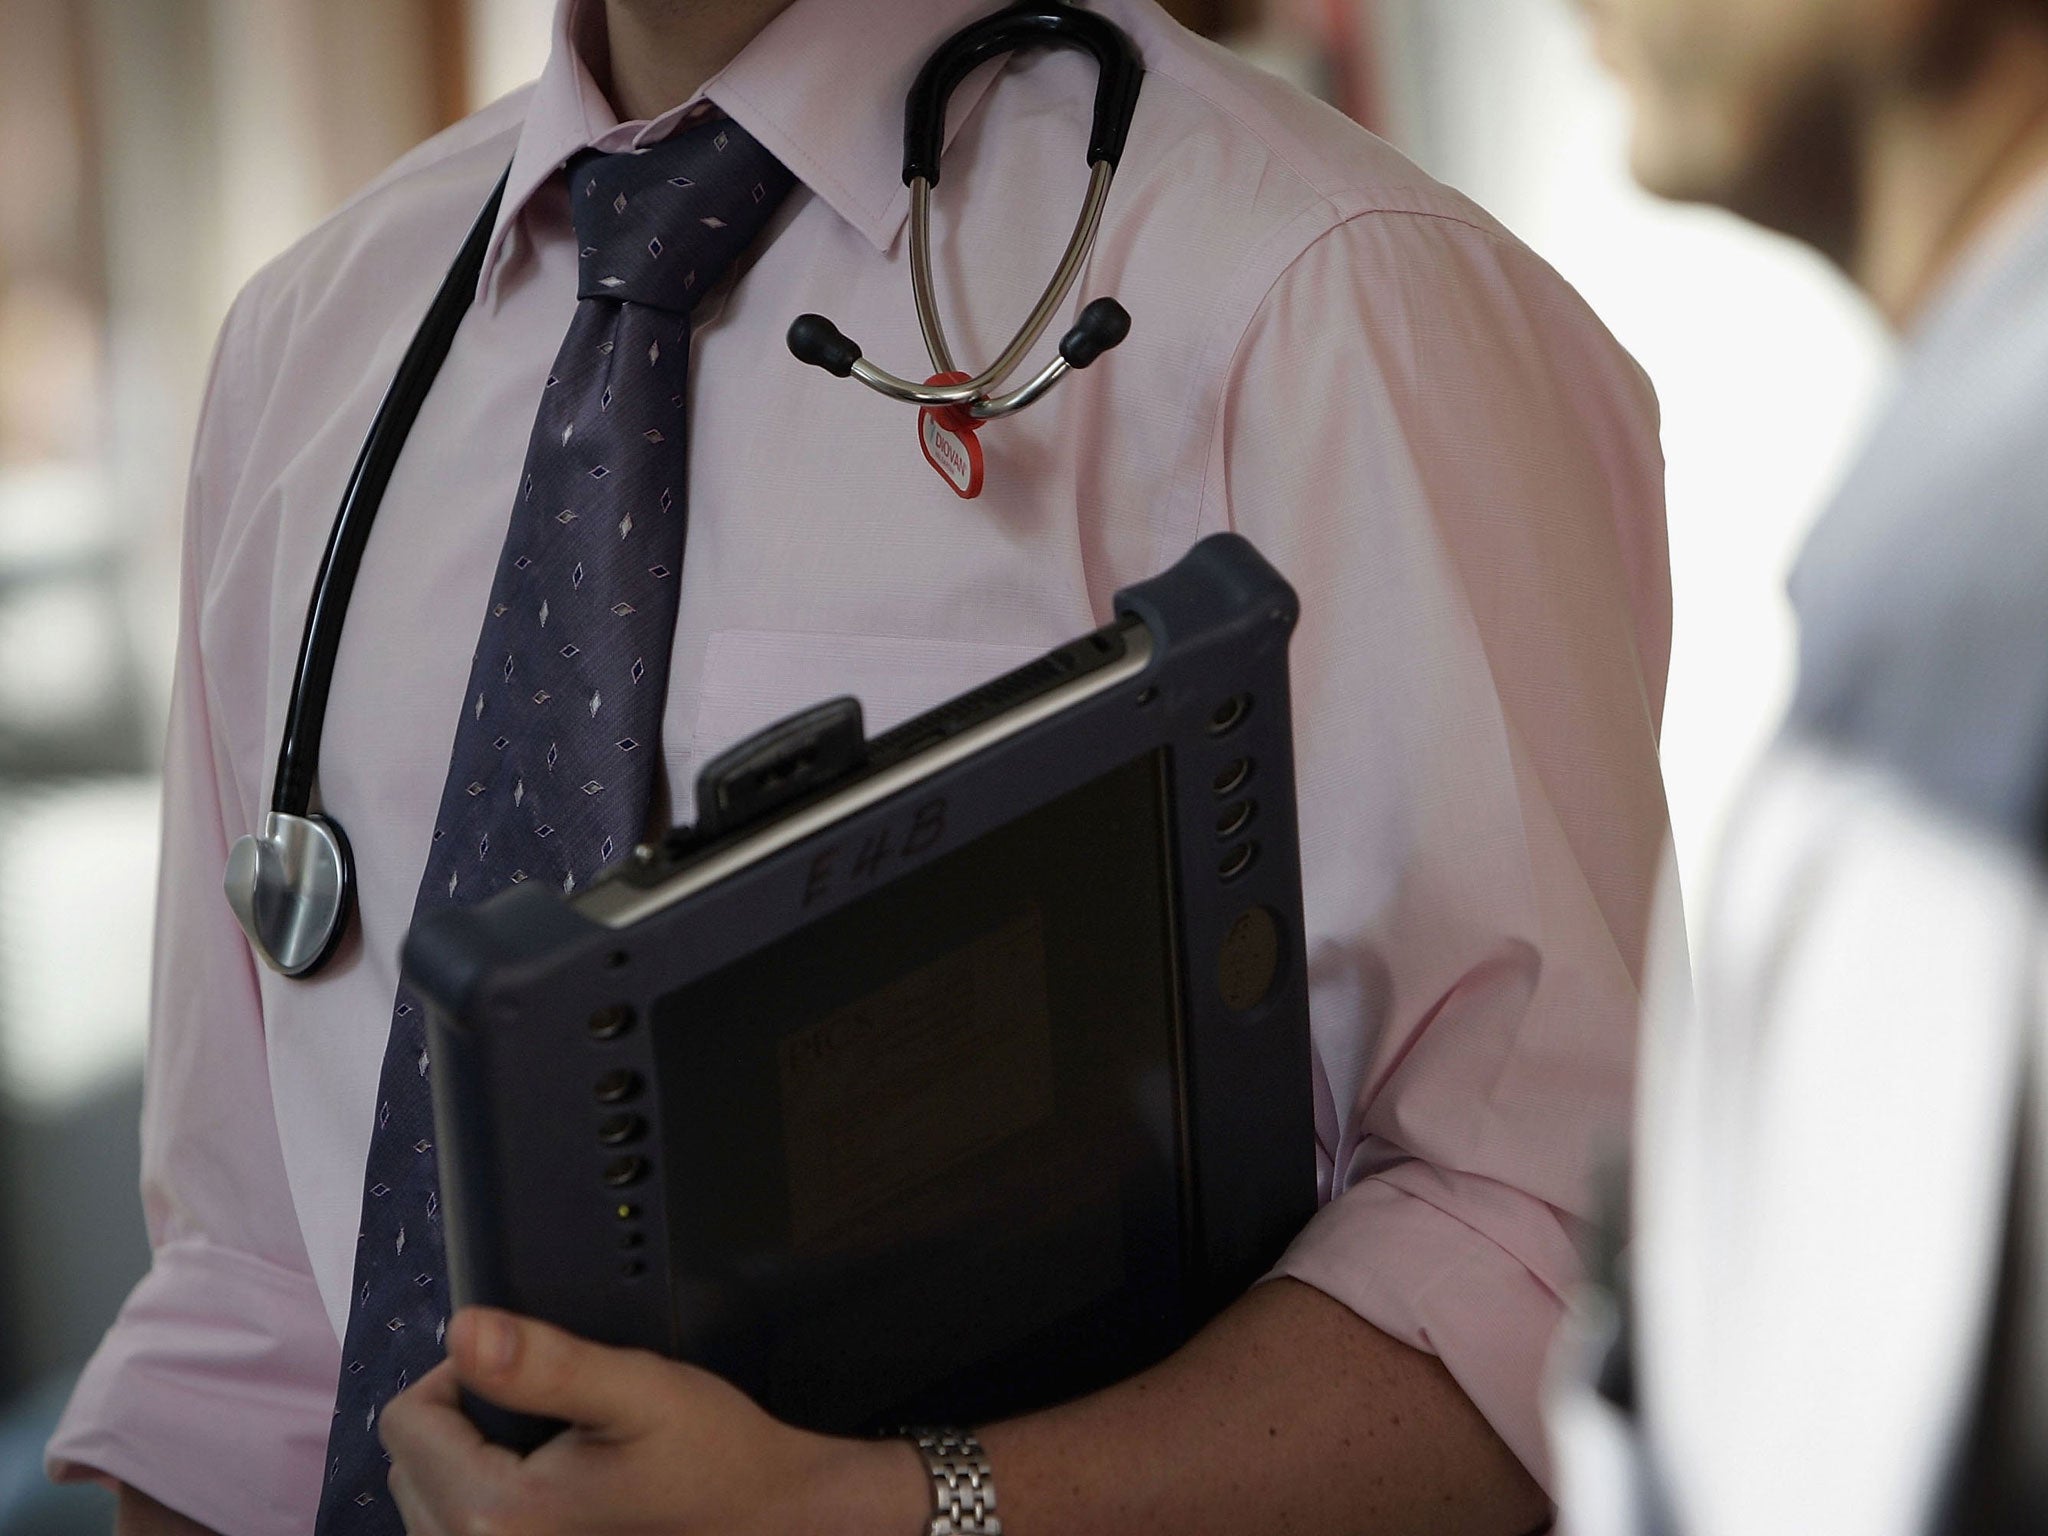 GP commissioners said their dual role had become unmanageable